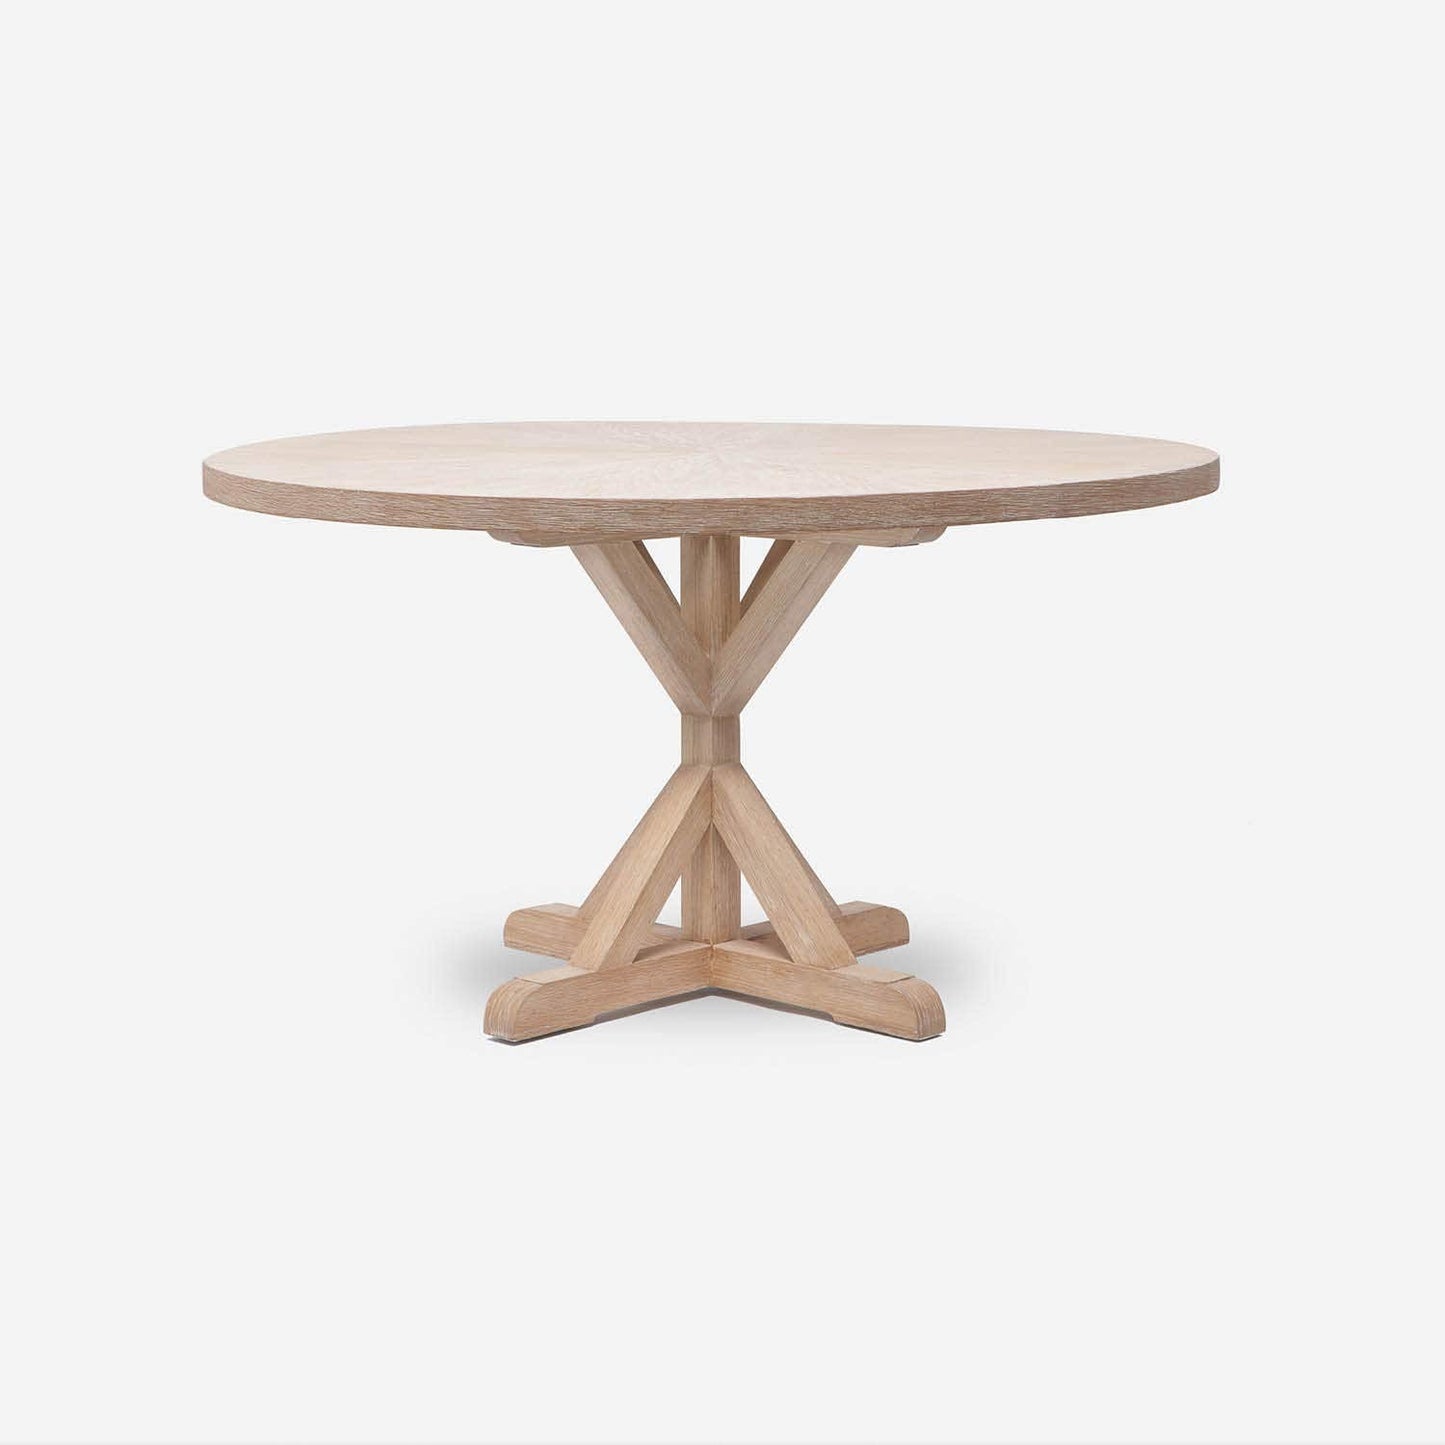 Made Goods Dane 54" x 30" White Cerused Oak Dinning Table With Round White Cerused Oak Table Top